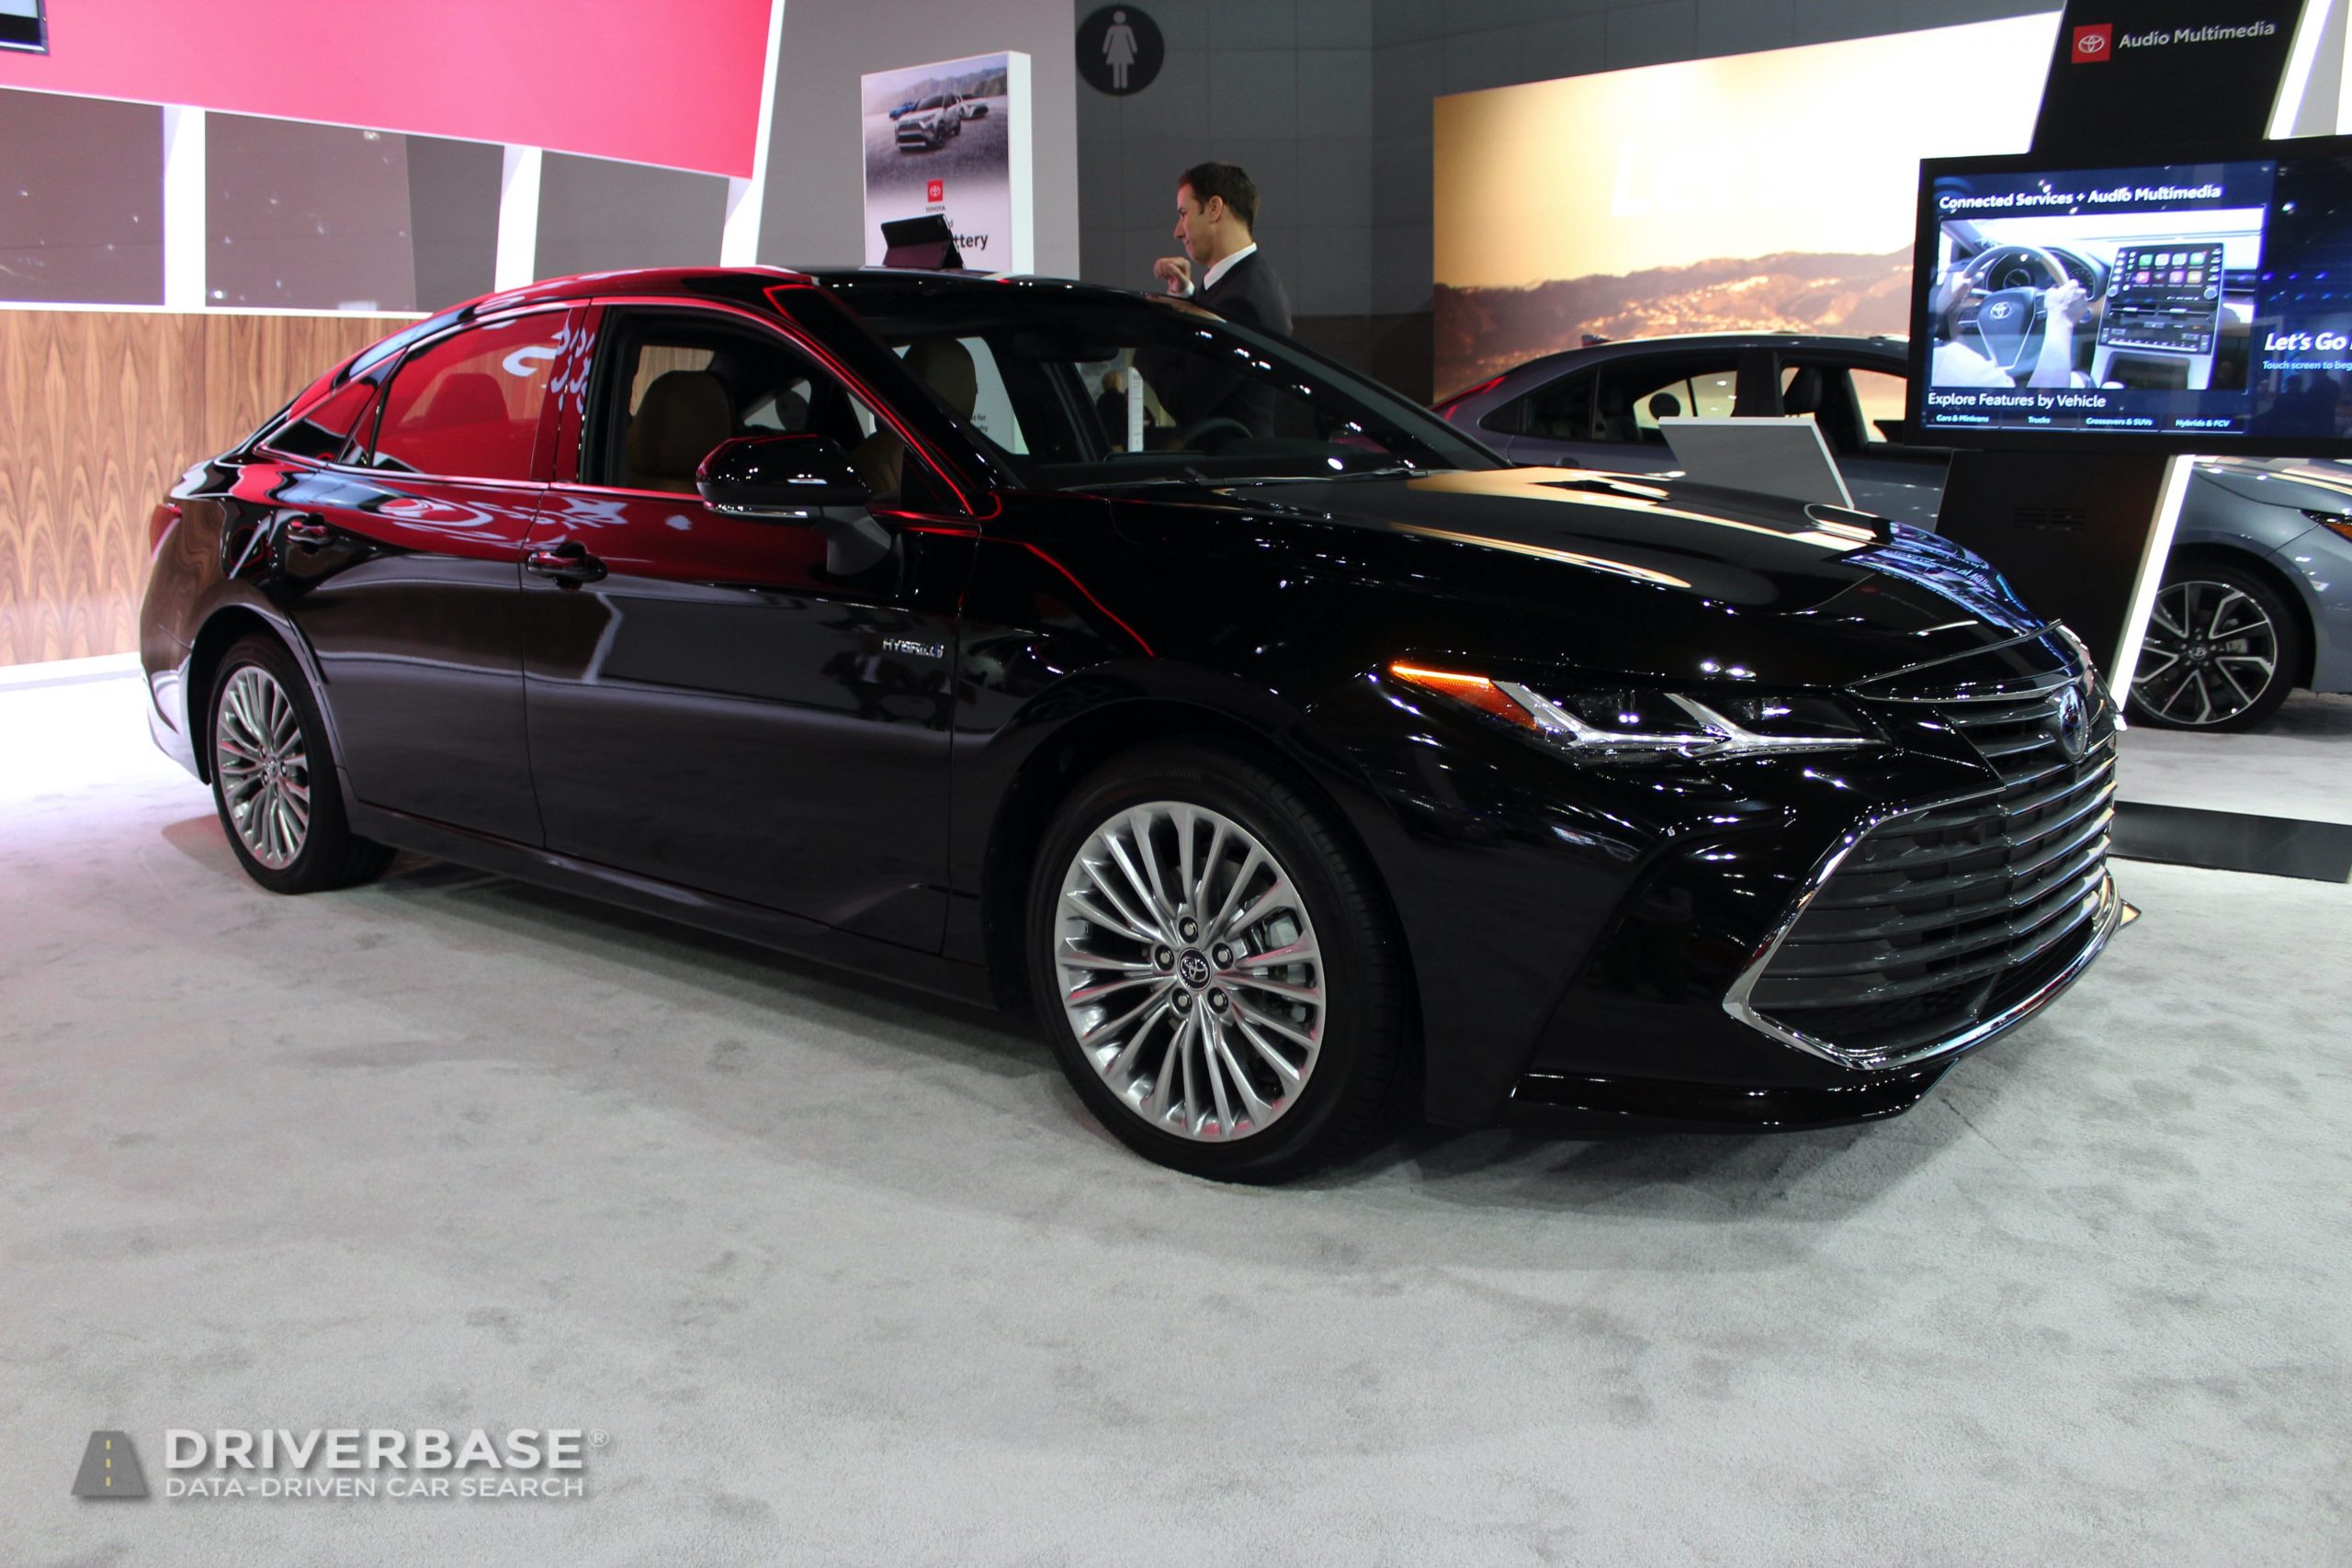 2020 Toyota Avalon Limited Hybrid at the 2019 Los Angeles Auto Show